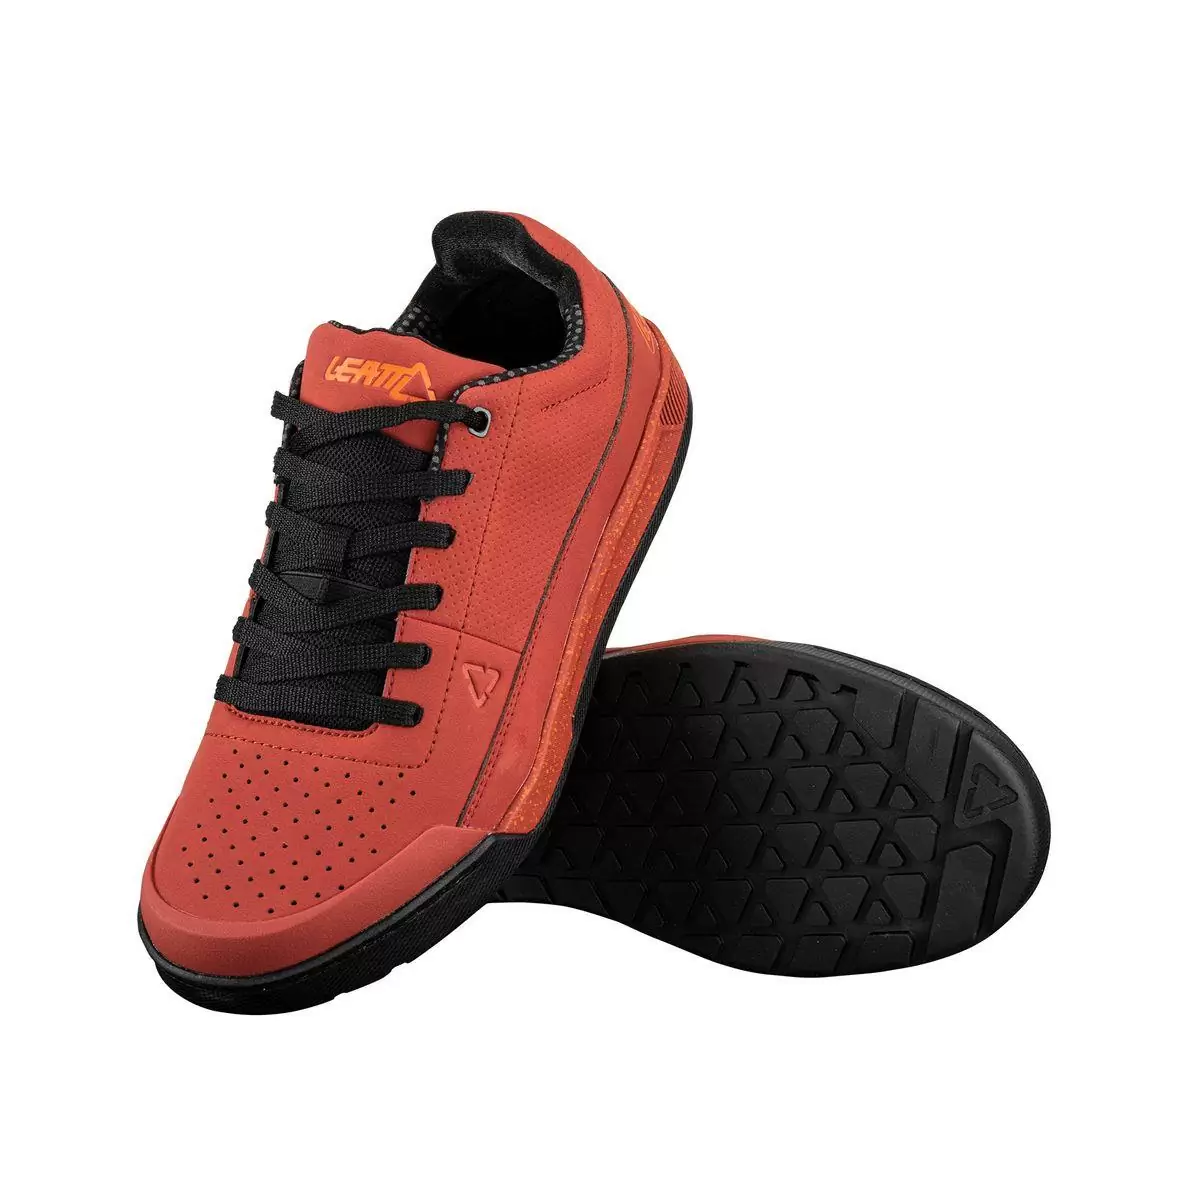 Chaussures VTT 2.0 Flat Rouge Taille 40 #5